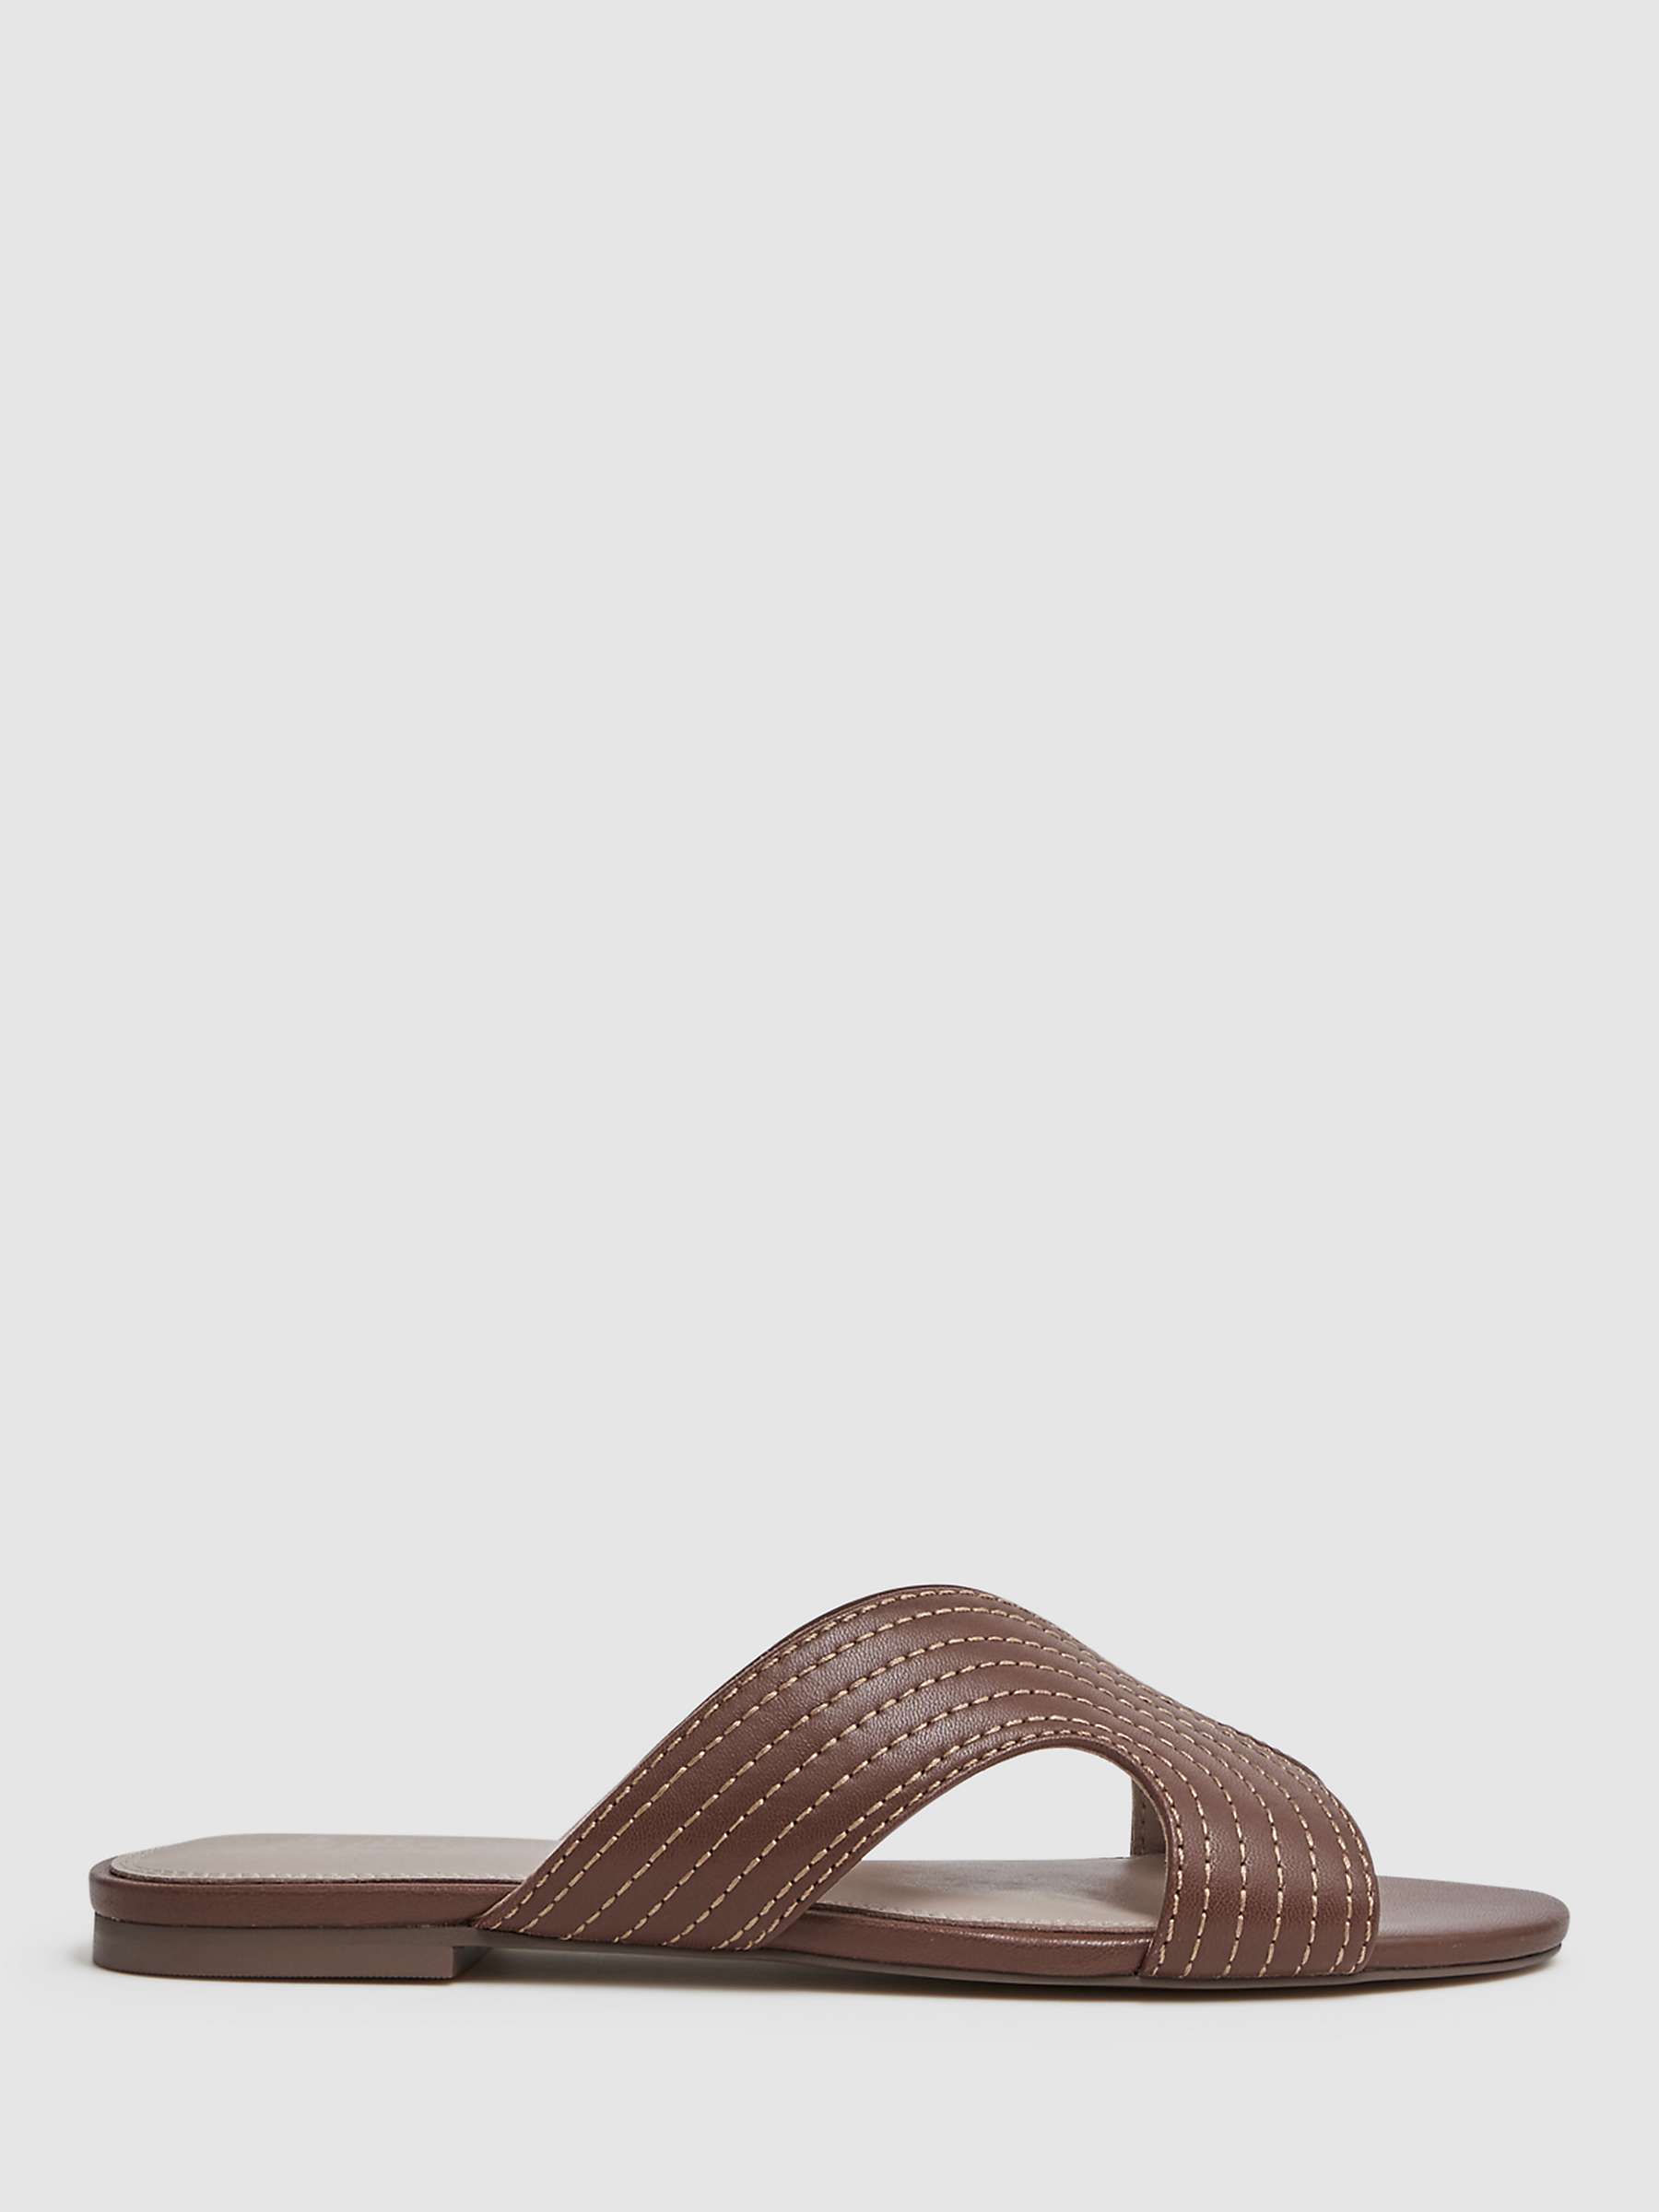 Buy Reiss Rose Leather Mules, Tan Online at johnlewis.com